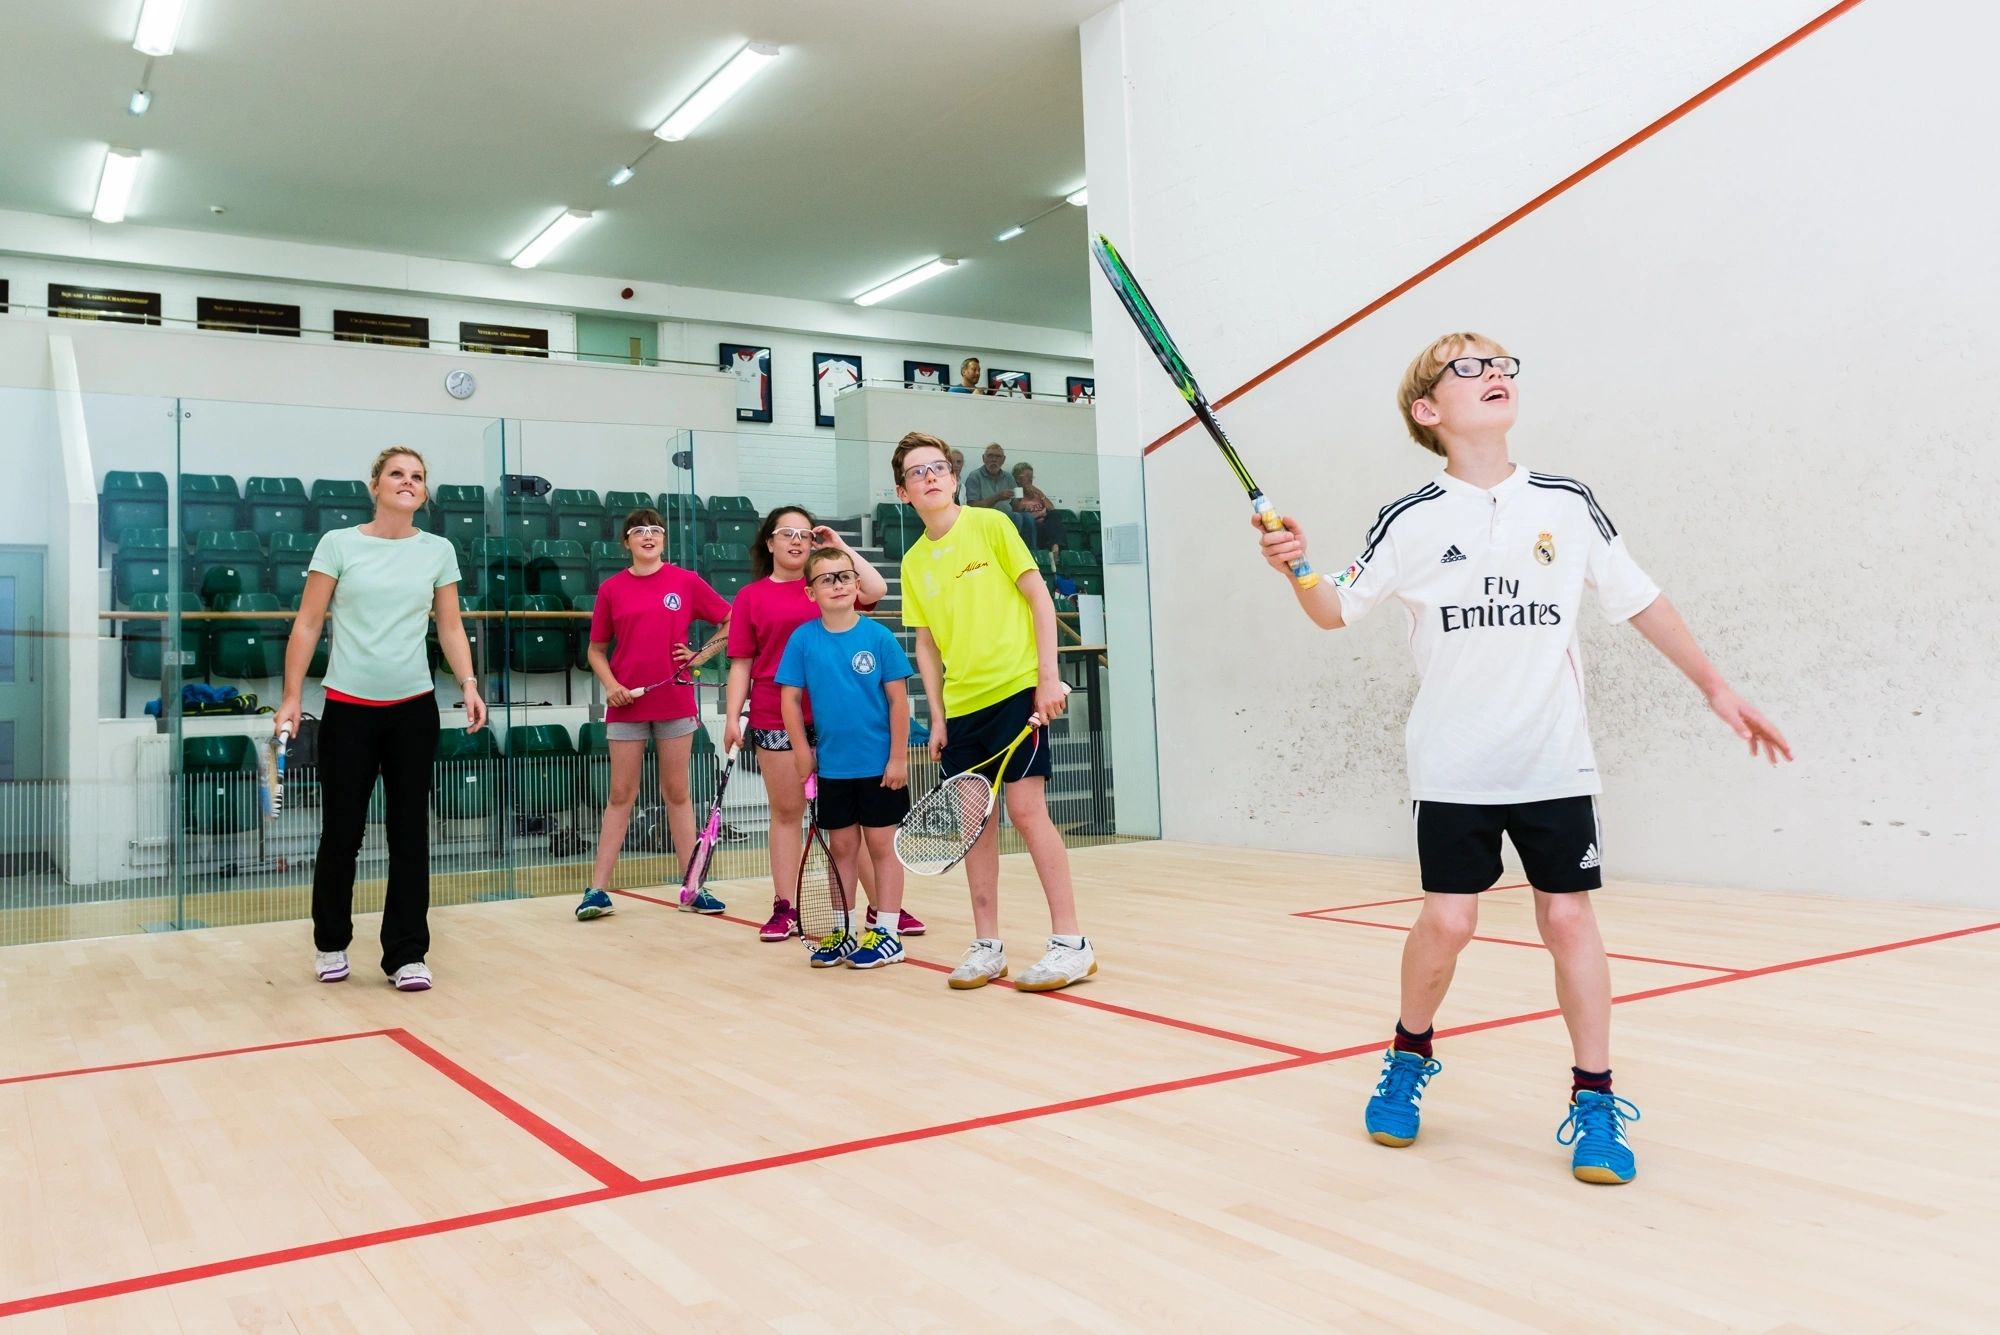 Kids are playing squash